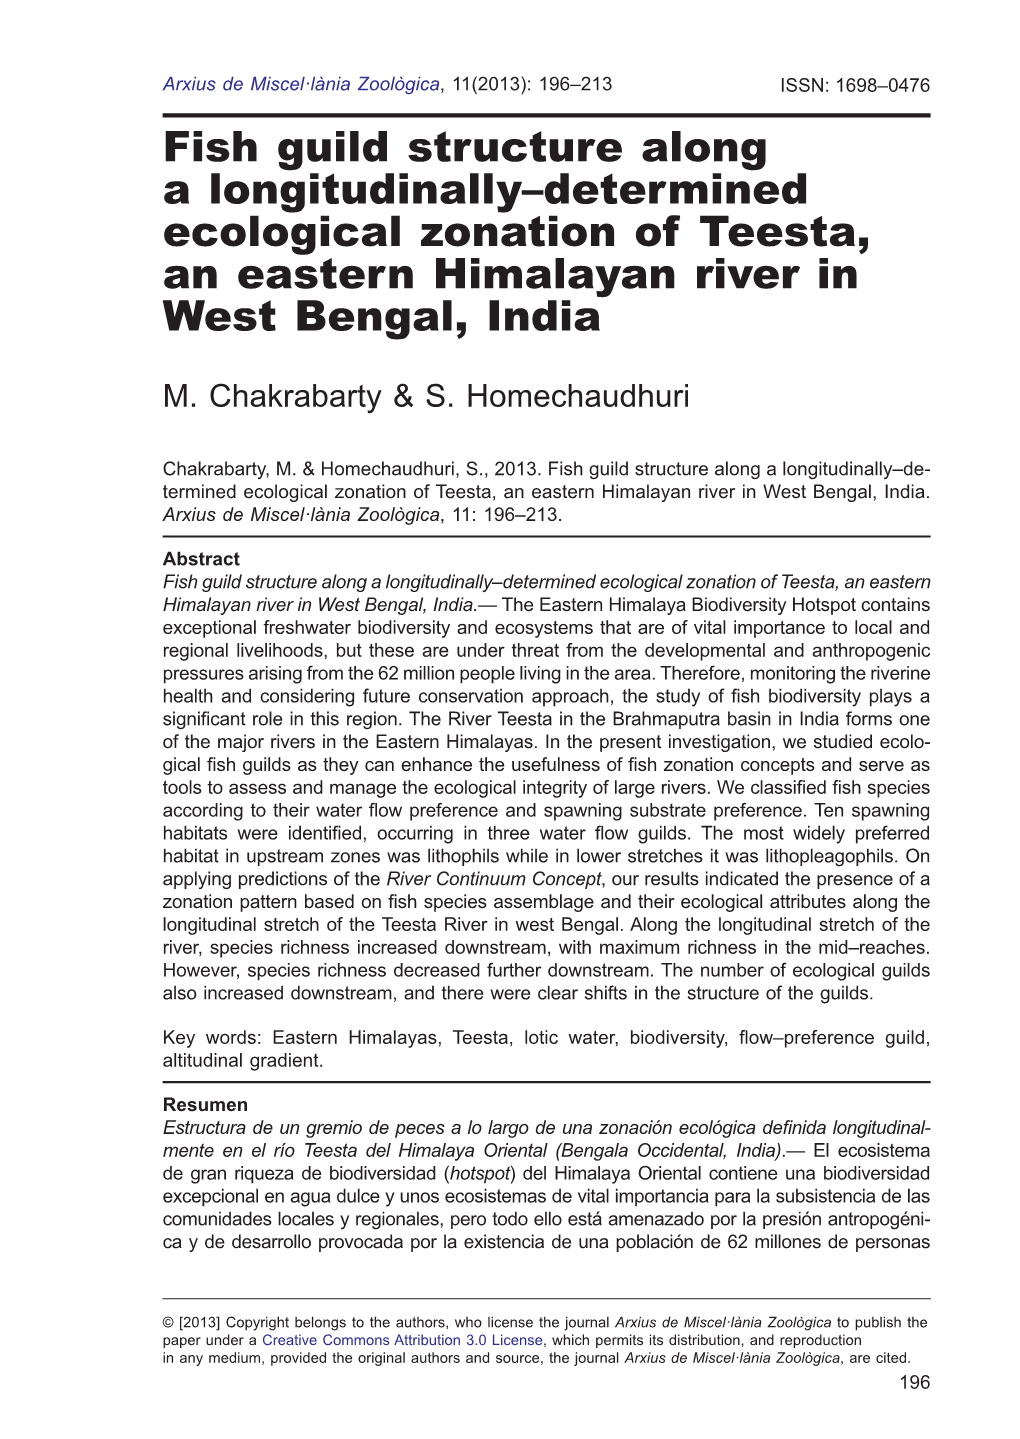 Fish Guild Structure Along a Longitudinally–Determined Ecological Zonation of Teesta, an Eastern Himalayan River in West Bengal, India